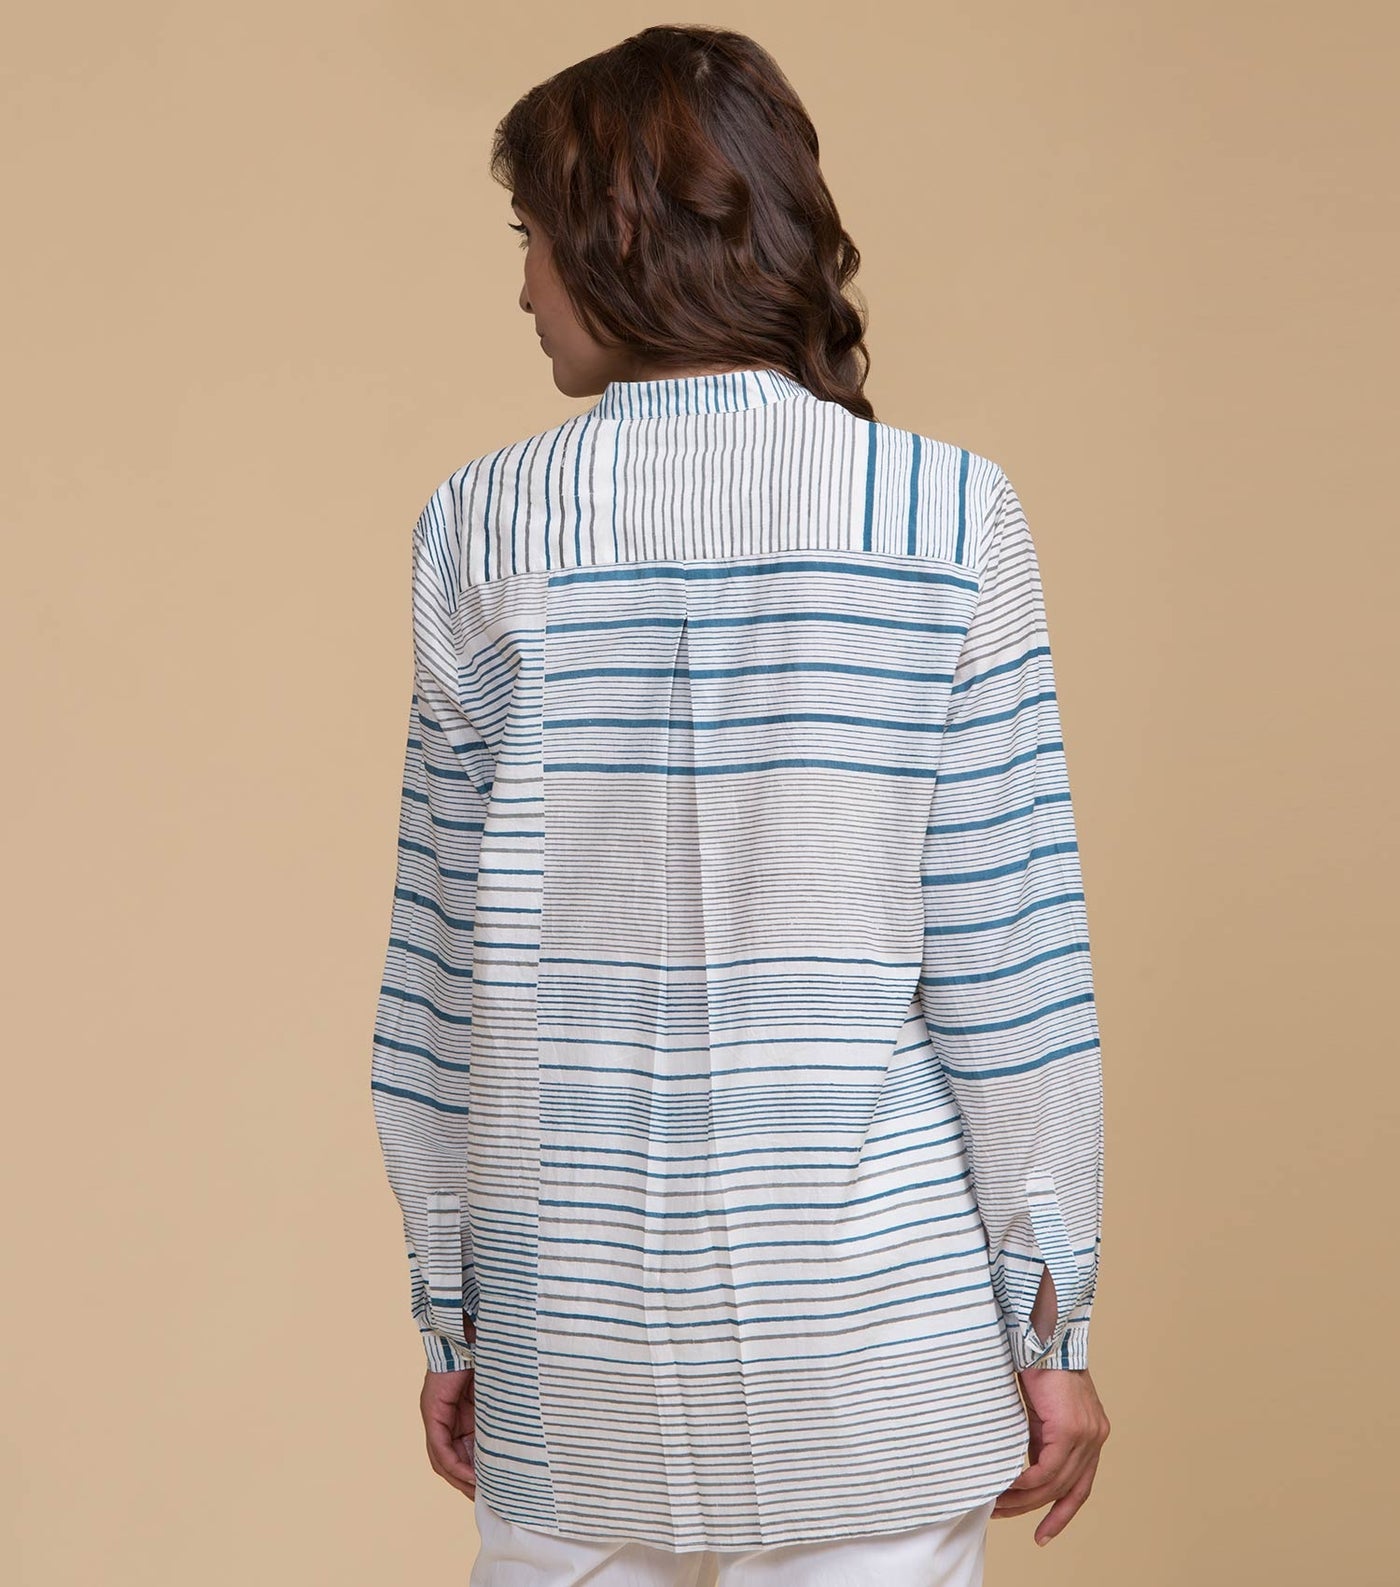 Natural multicoloured stripped top